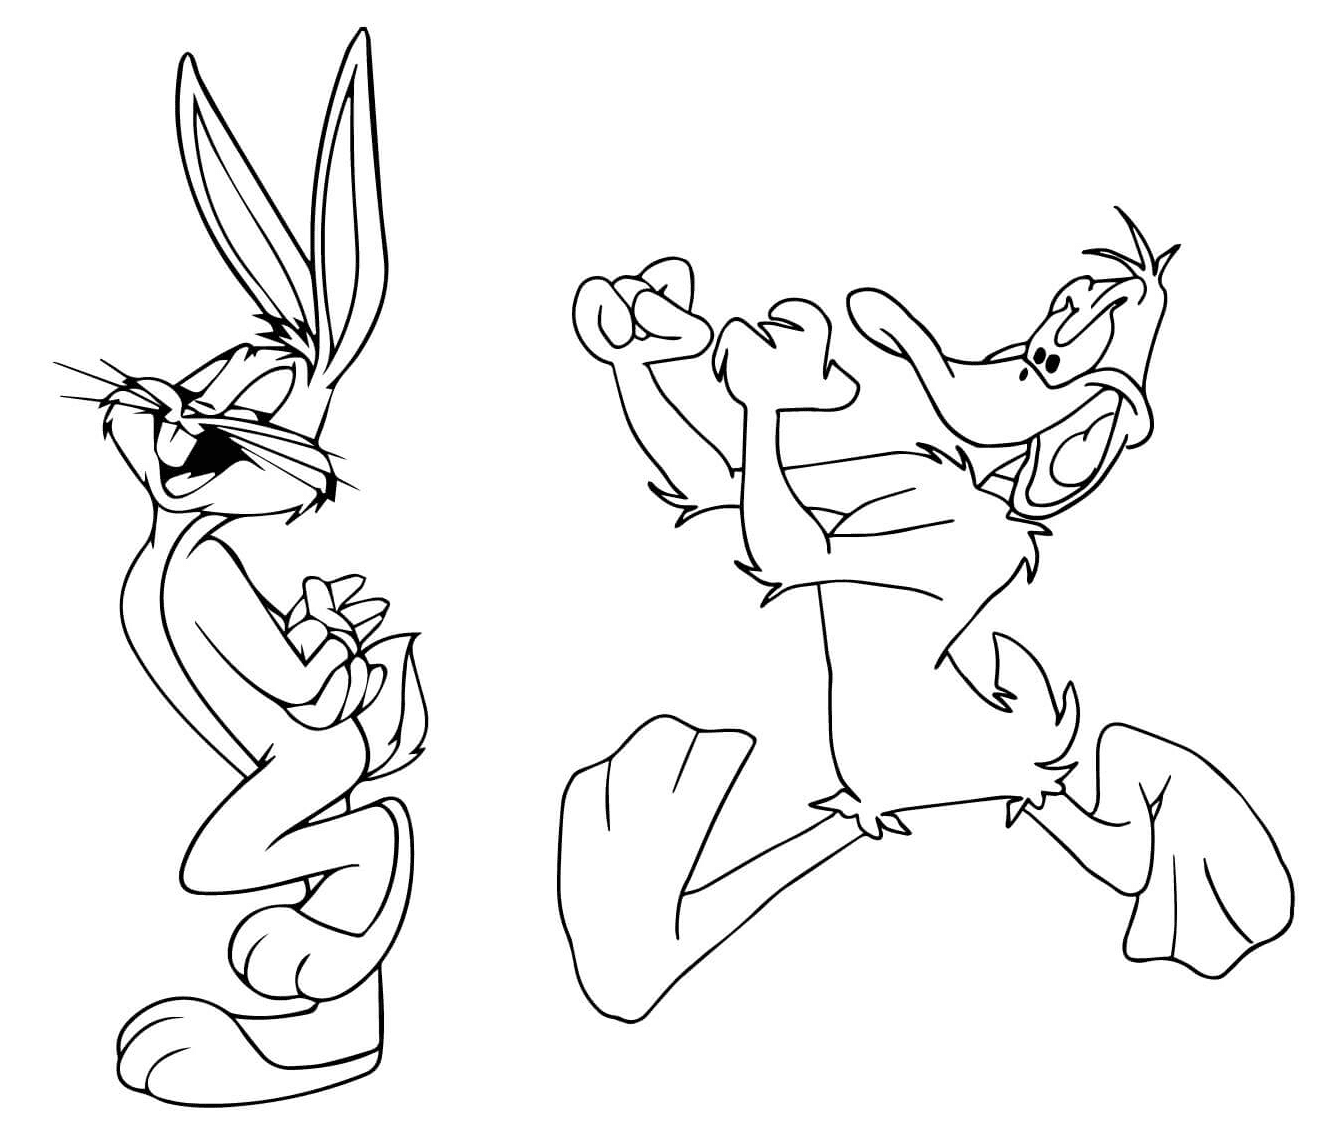 Daffy Duck Chasing Bugs Bunny Coloring Pages